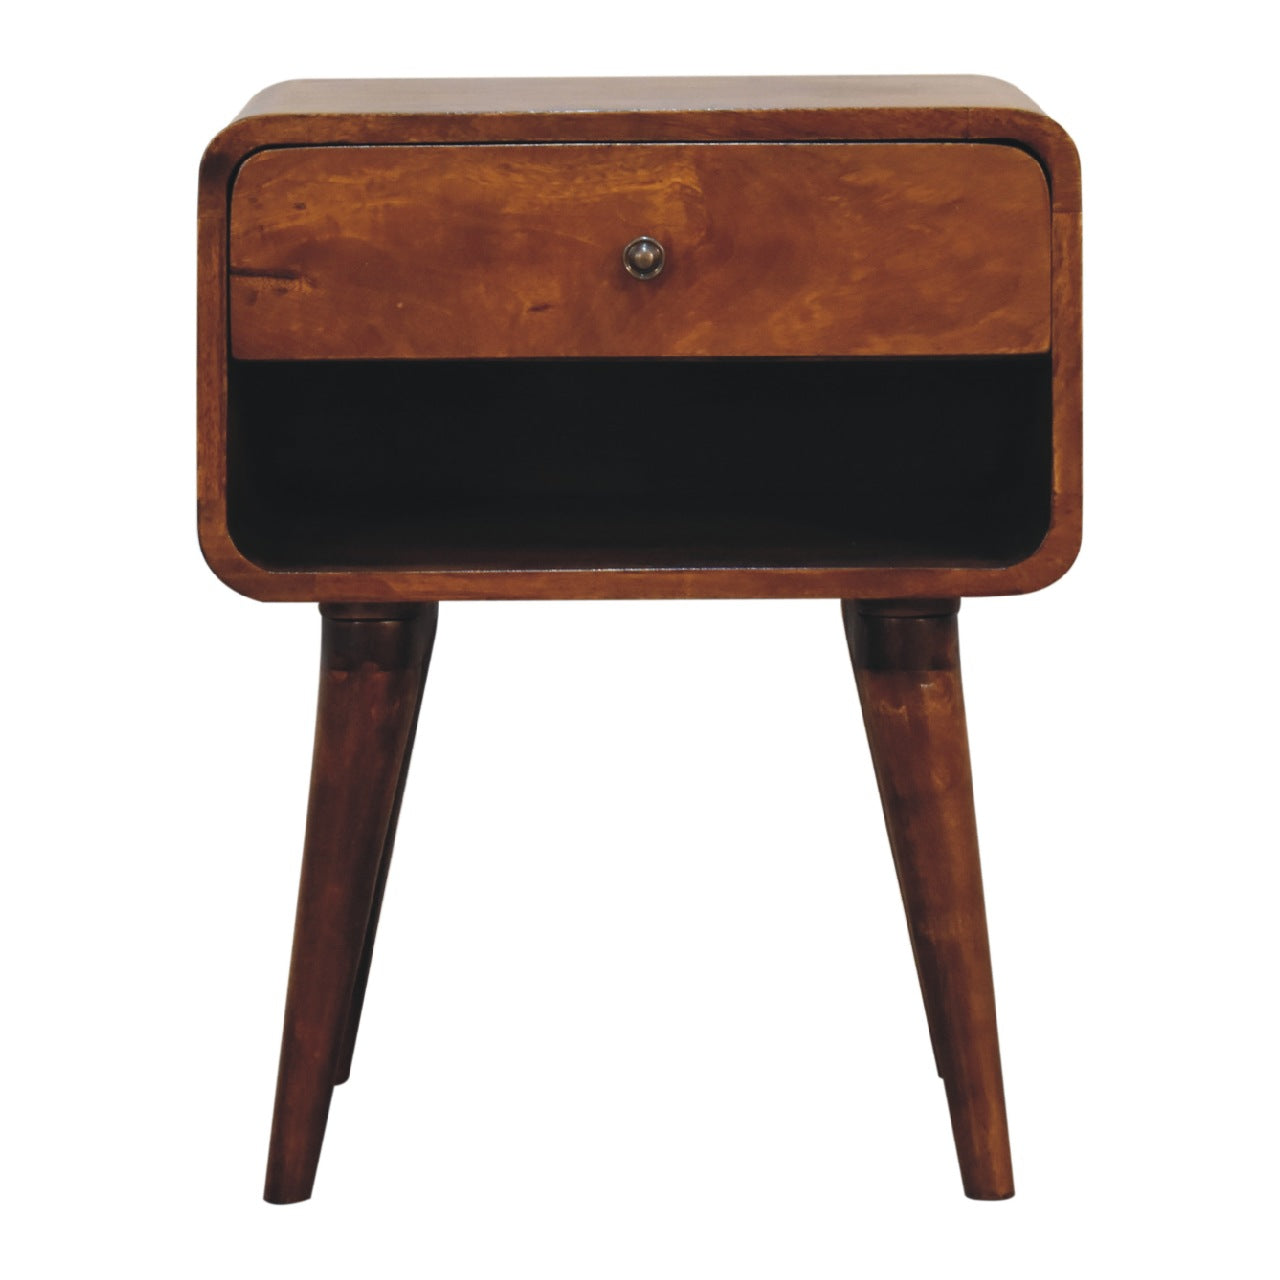 View Curved Chestnut Bedside with Open Slot information